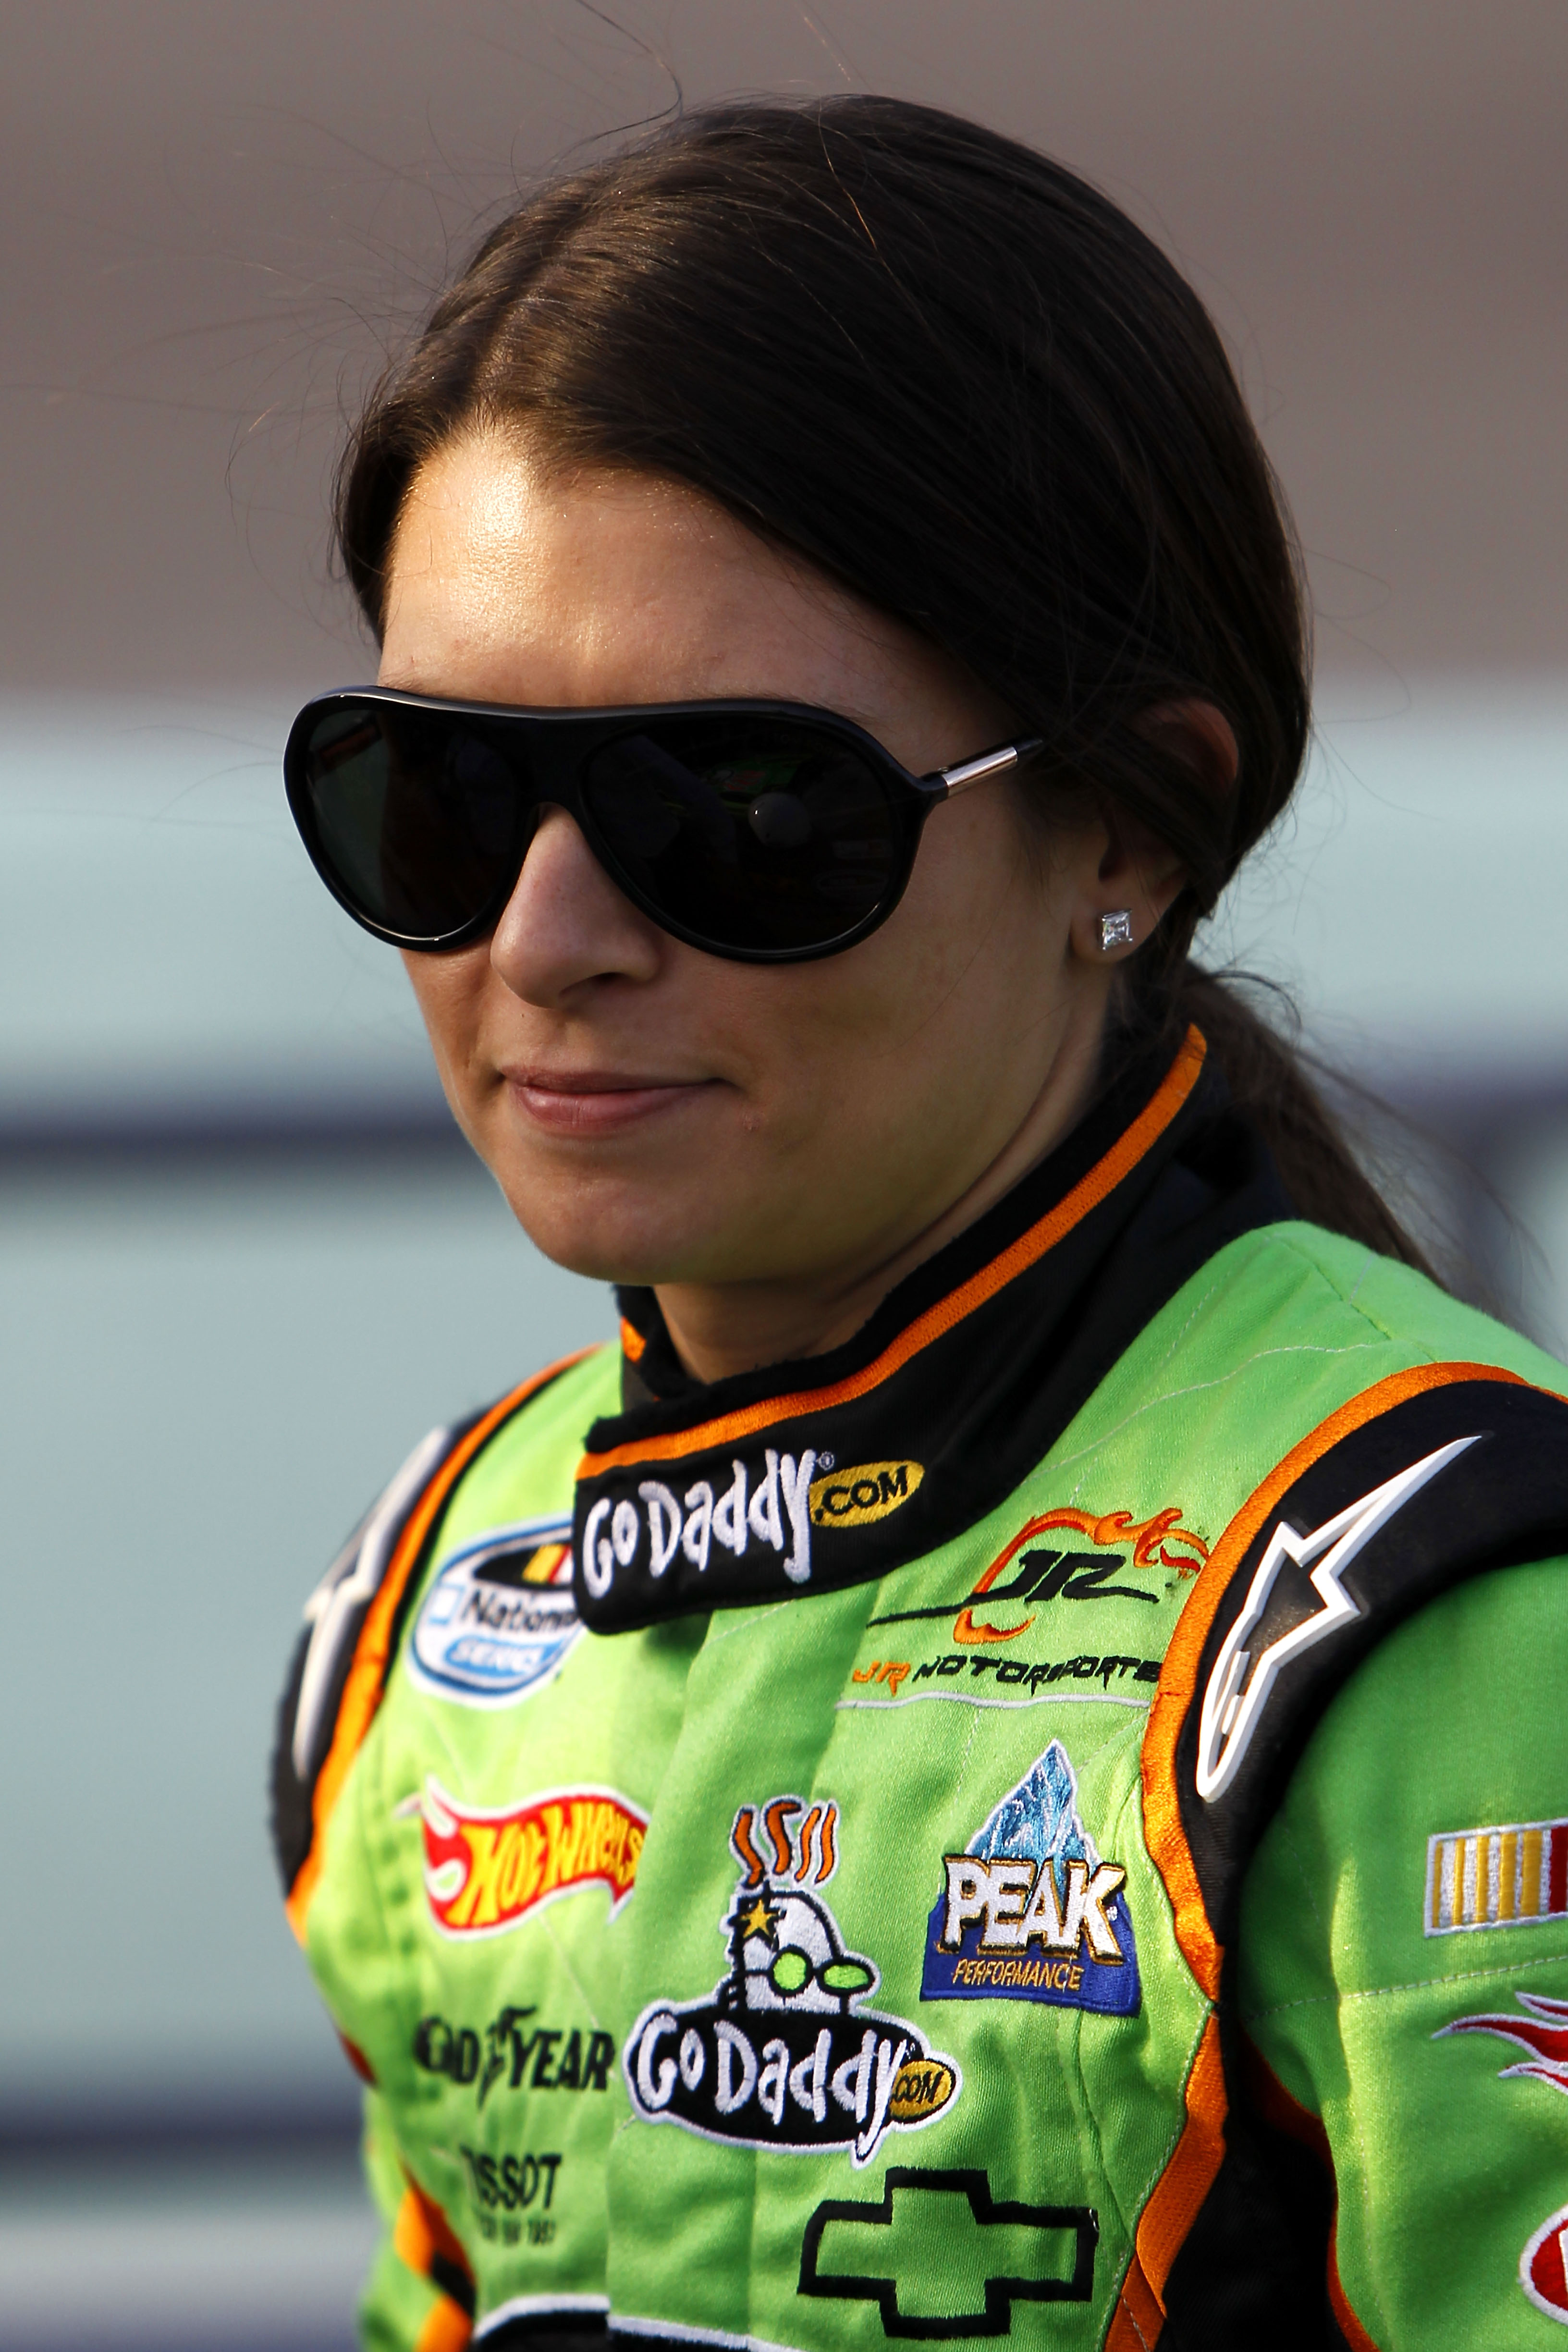 HOMESTEAD, FL - NOVEMBER 20:  Danica Patrick, driver of the #7 GoDaddy.com Chevrolet, stands on the grid prior to the NASCAR Nationwide Series Ford 300 at Homestead-Miami Speedway on November 20, 2010 in Homestead, Florida.  (Photo by Chris Trotman/Getty